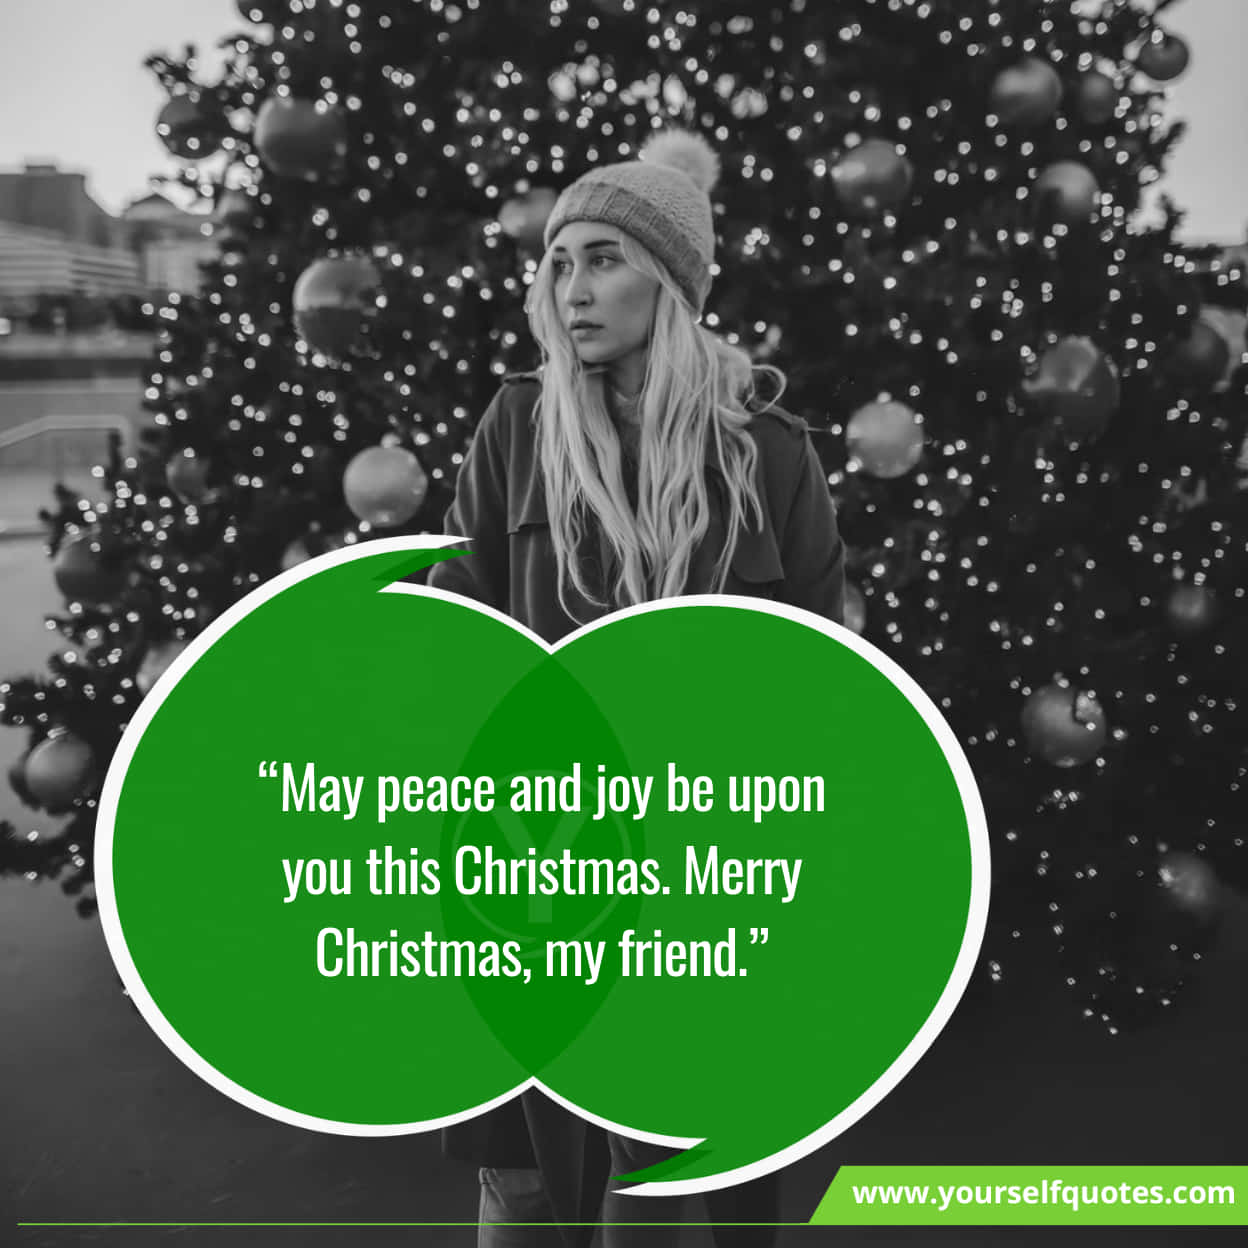 Inspiring Messages On Merry Christmas